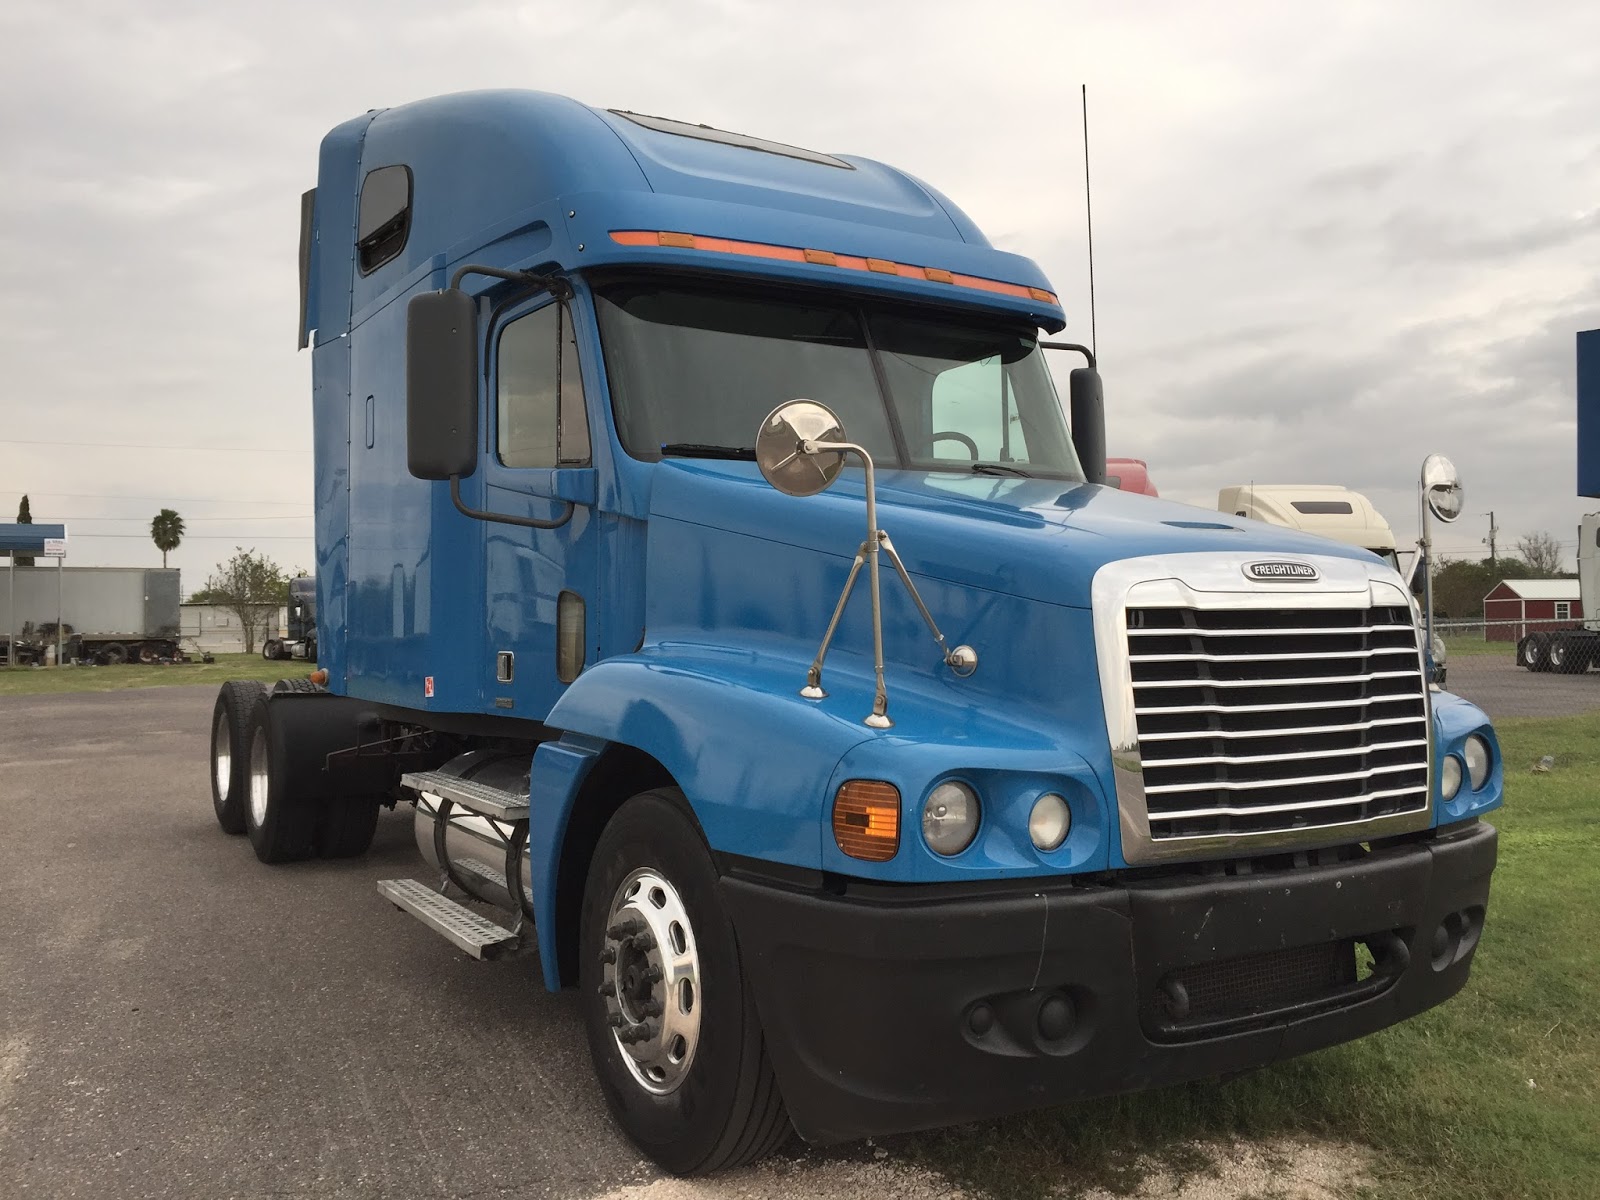 HEAVY DUTY TRUCK SALES, USED TRUCK SALES: USED TRUCKS FOR SALE TEXAS